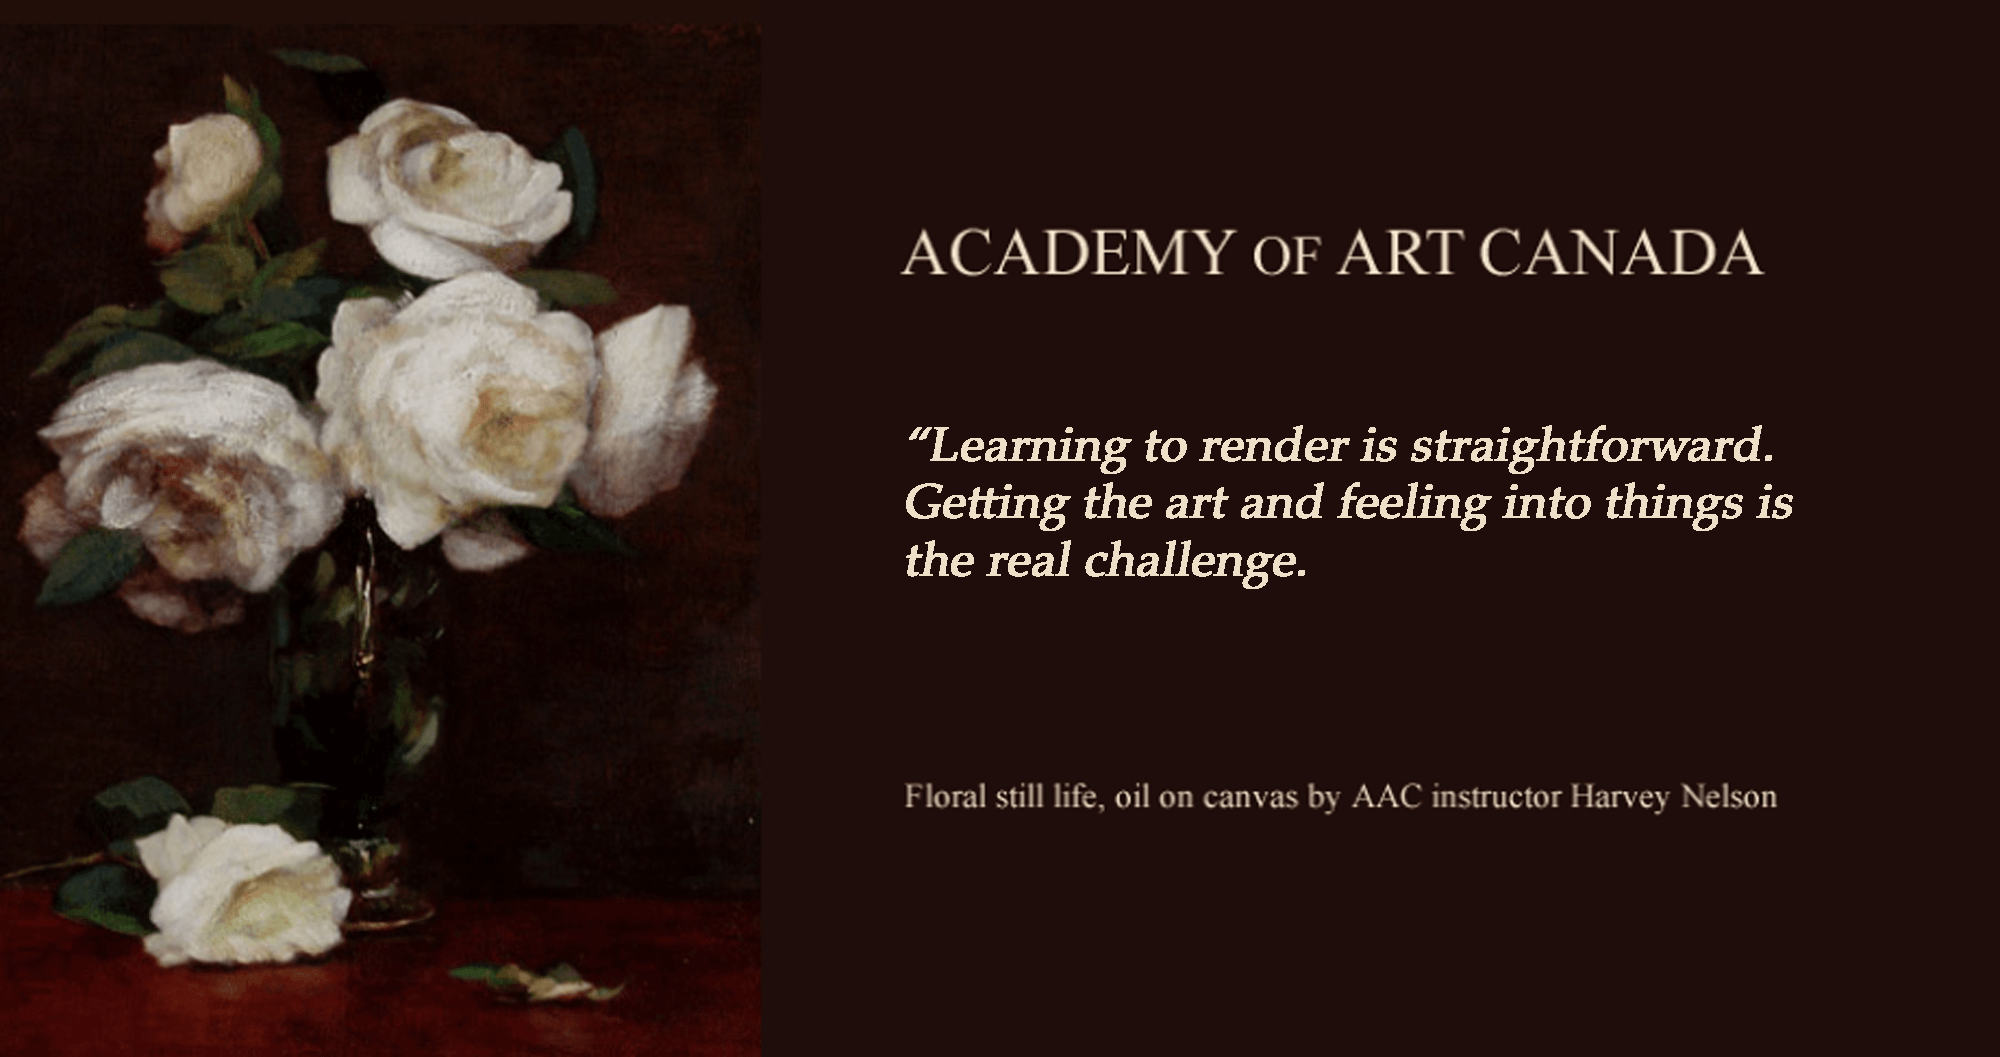 academy-of-art-canada-floral-still-life-in-oils-by-aac-instructor-harvey-nelson-with-quote